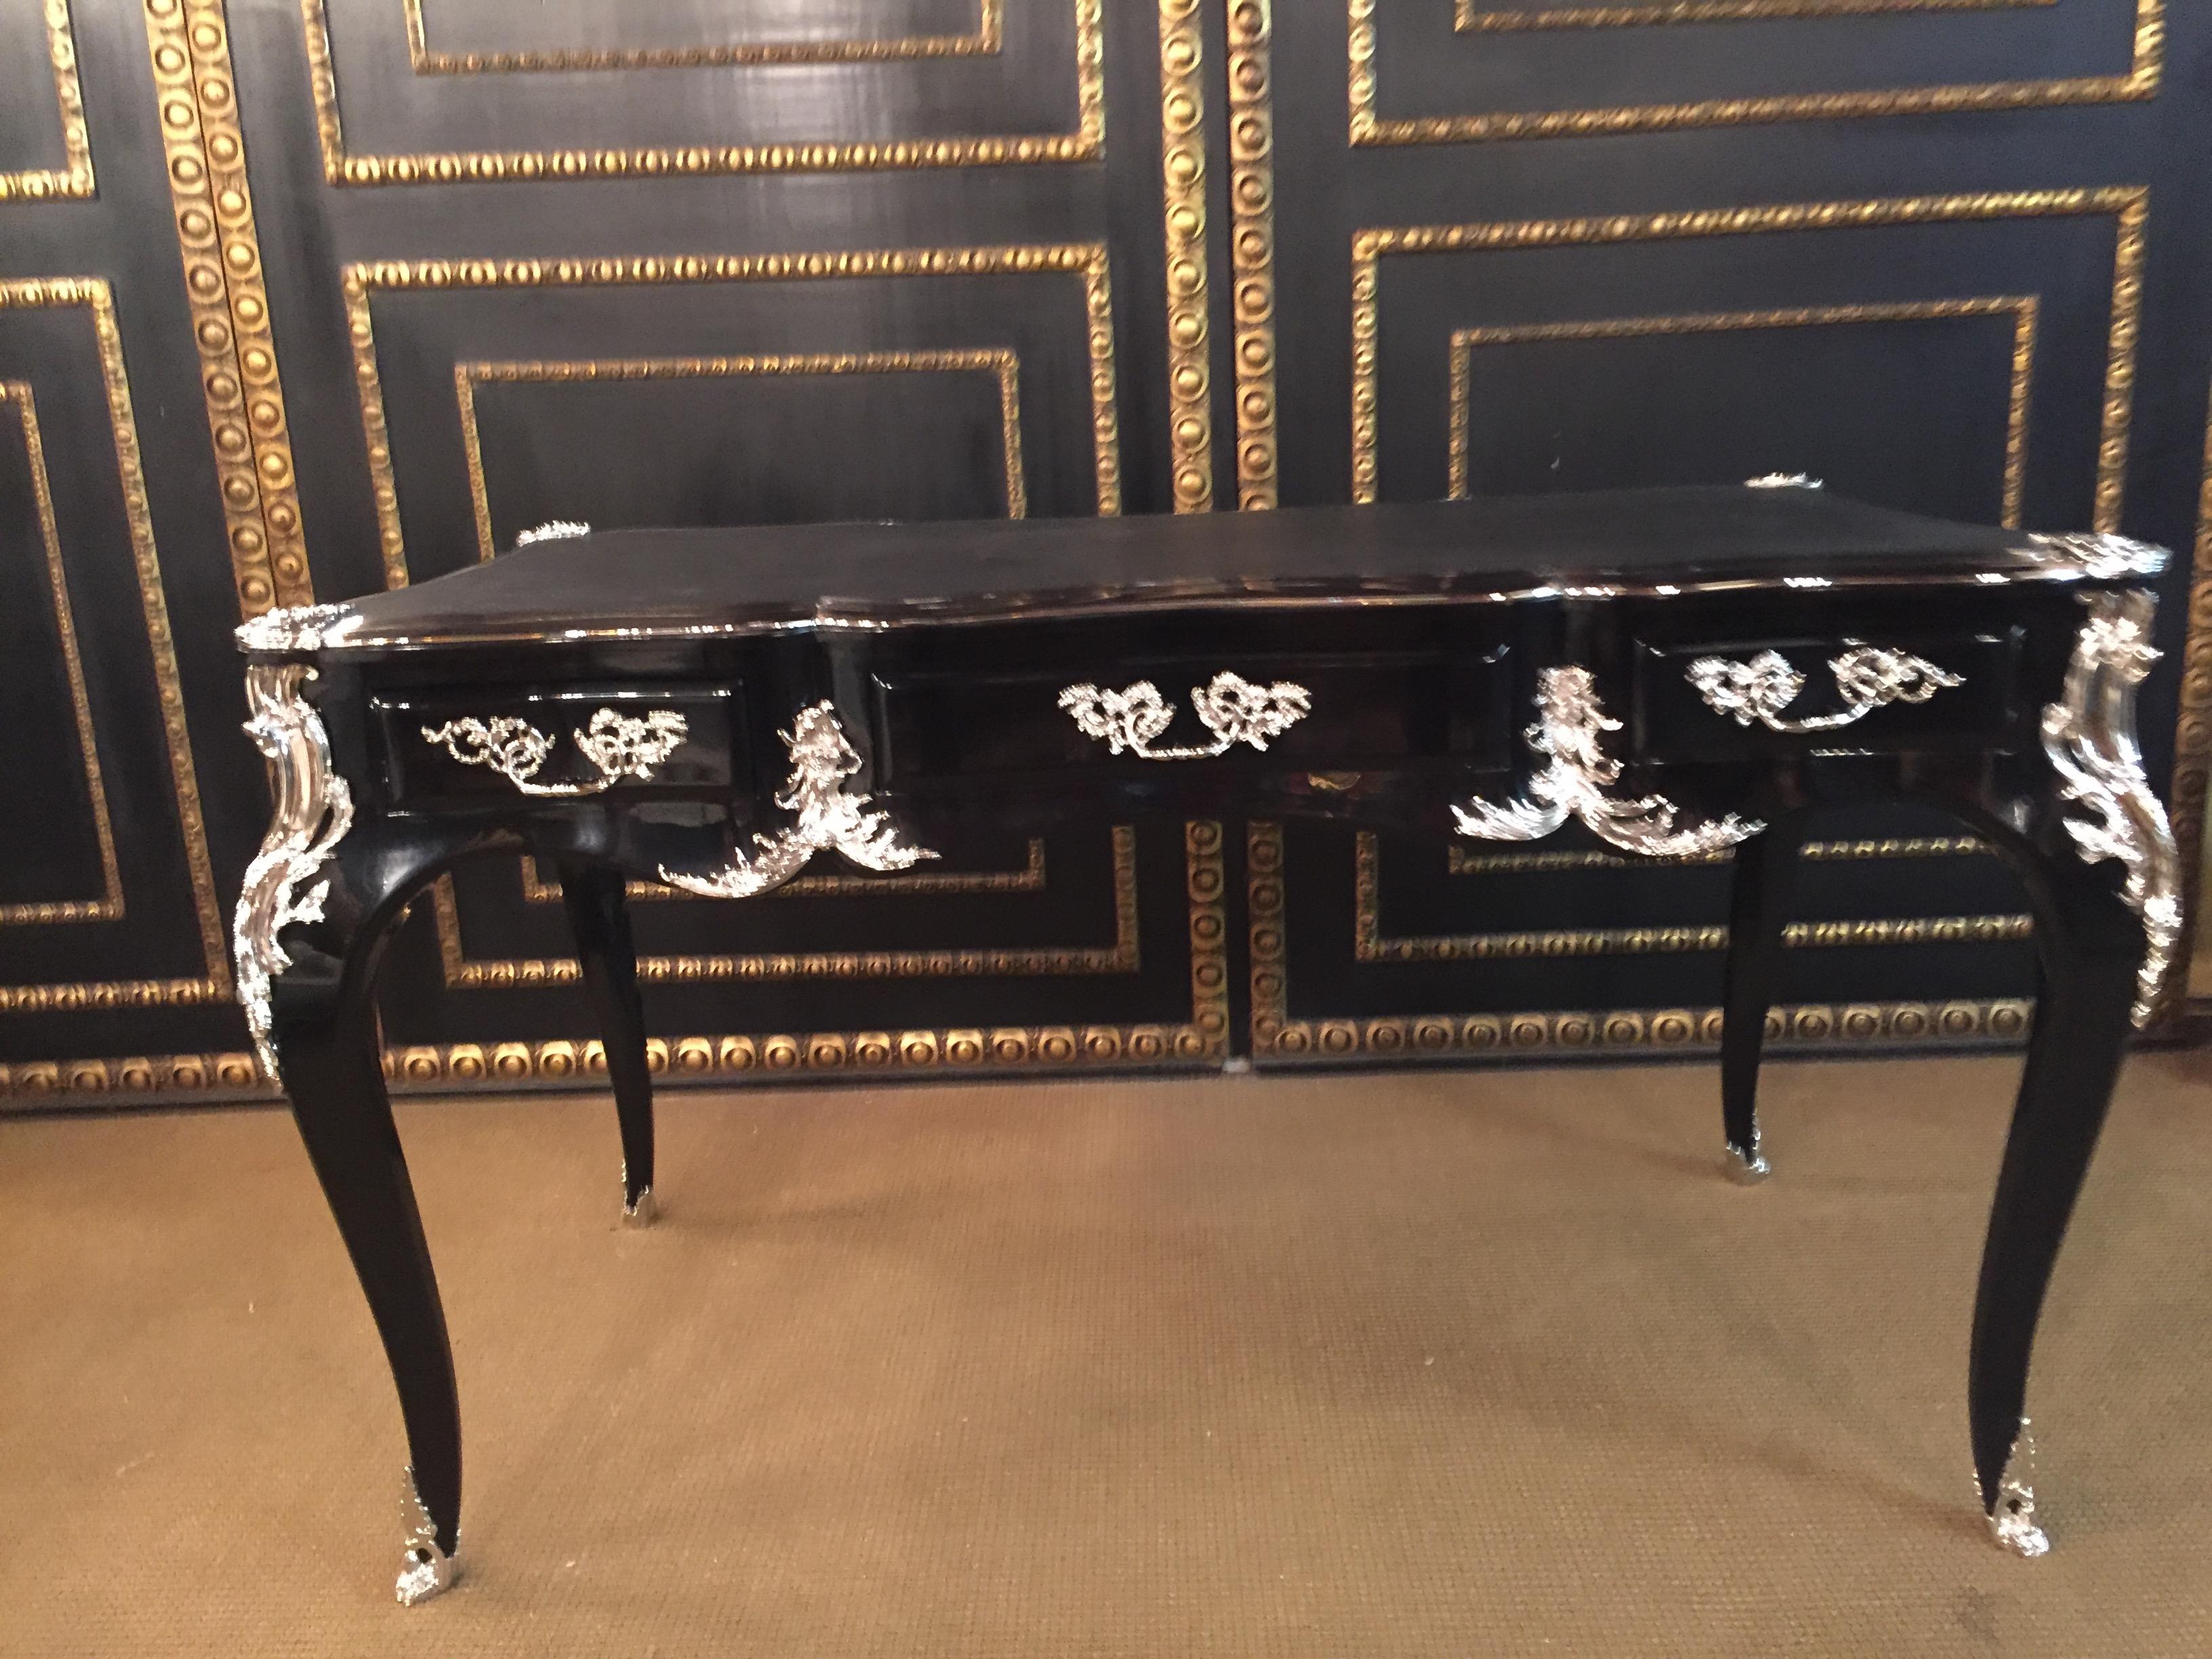 Bureau plat writing table in the style of Louis XV style, silvered bronze fittings. Piano lacquer black on solid beech wood. Heavily arched, four-sided passively curved tripod frame with wide knee lug on elegant curved squares in the drive boxes.